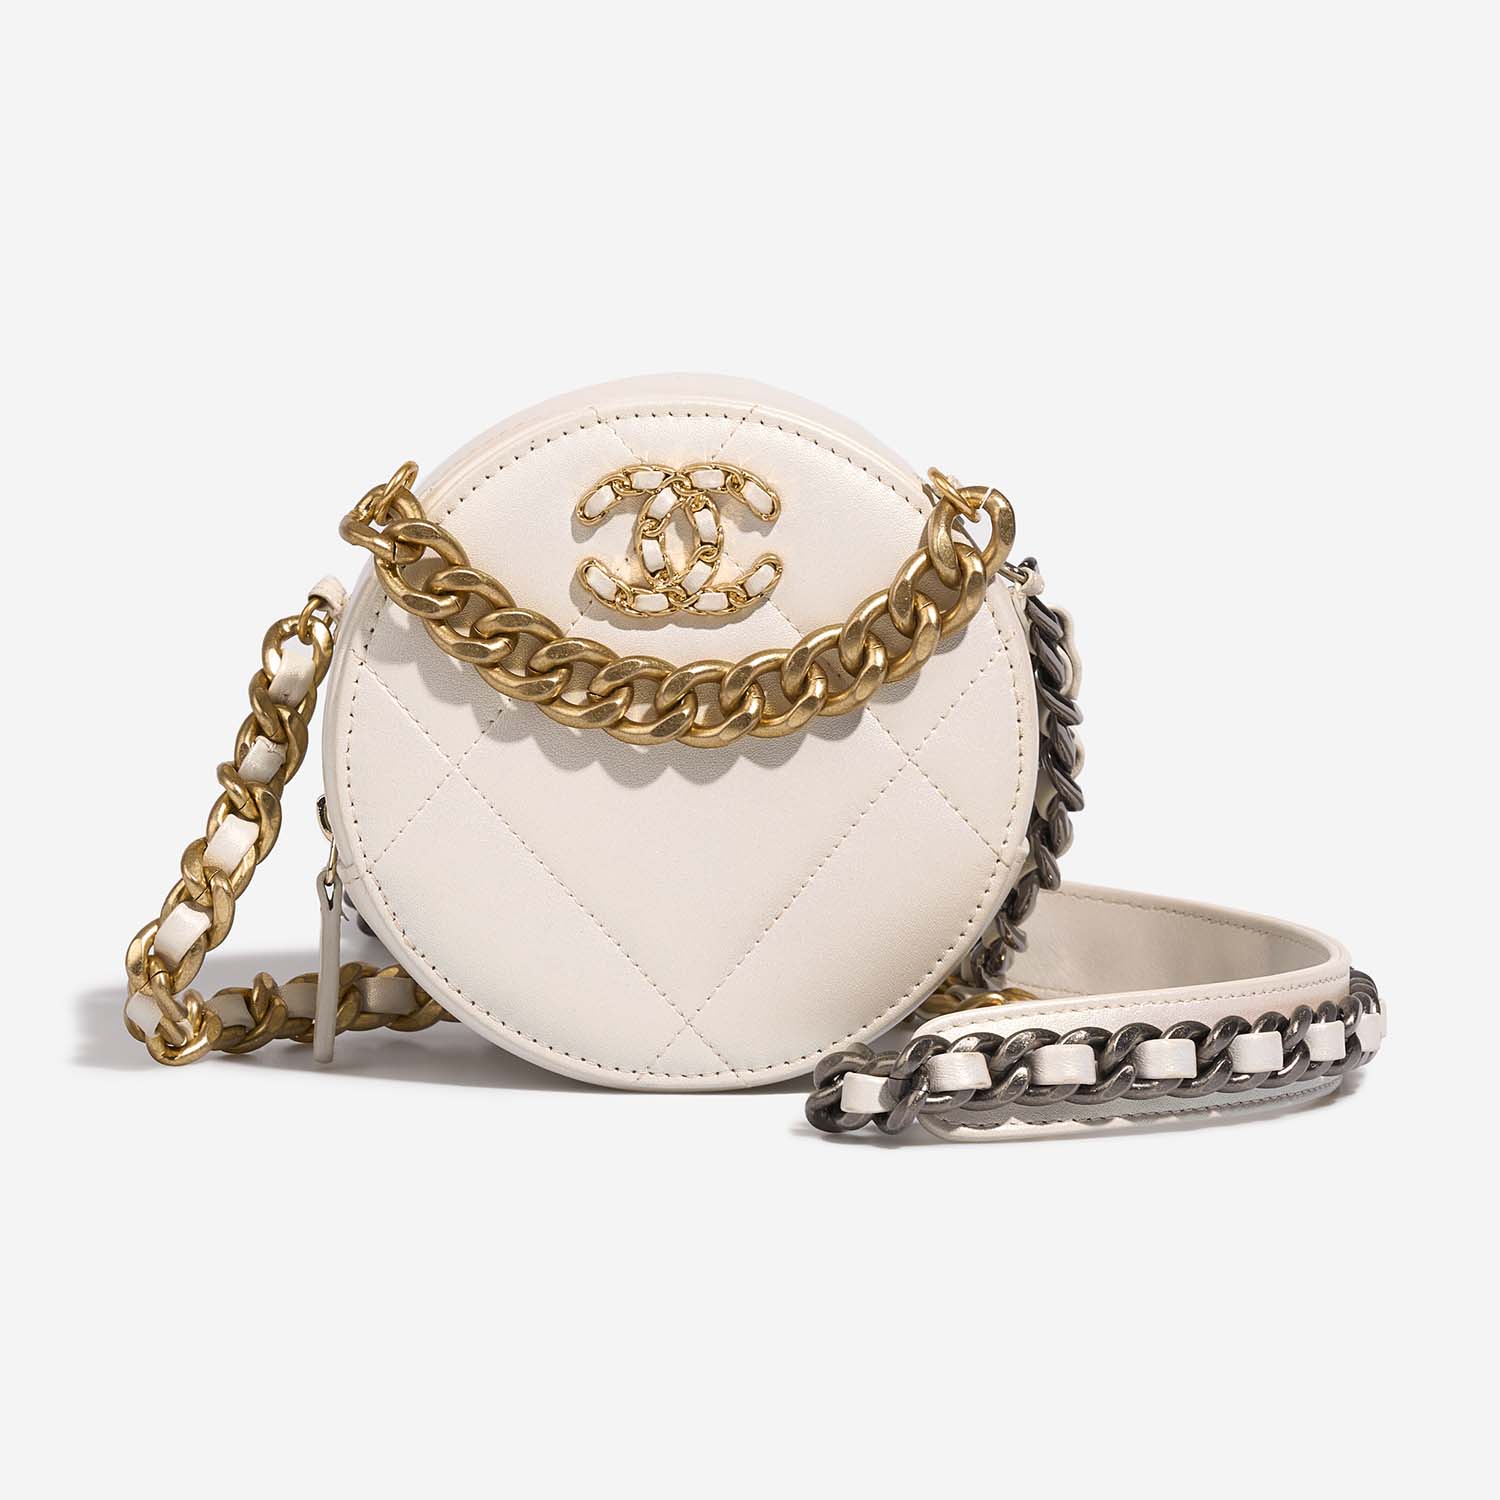 Chanel 19 RoundClutch PearlWhite Front  | Sell your designer bag on Saclab.com